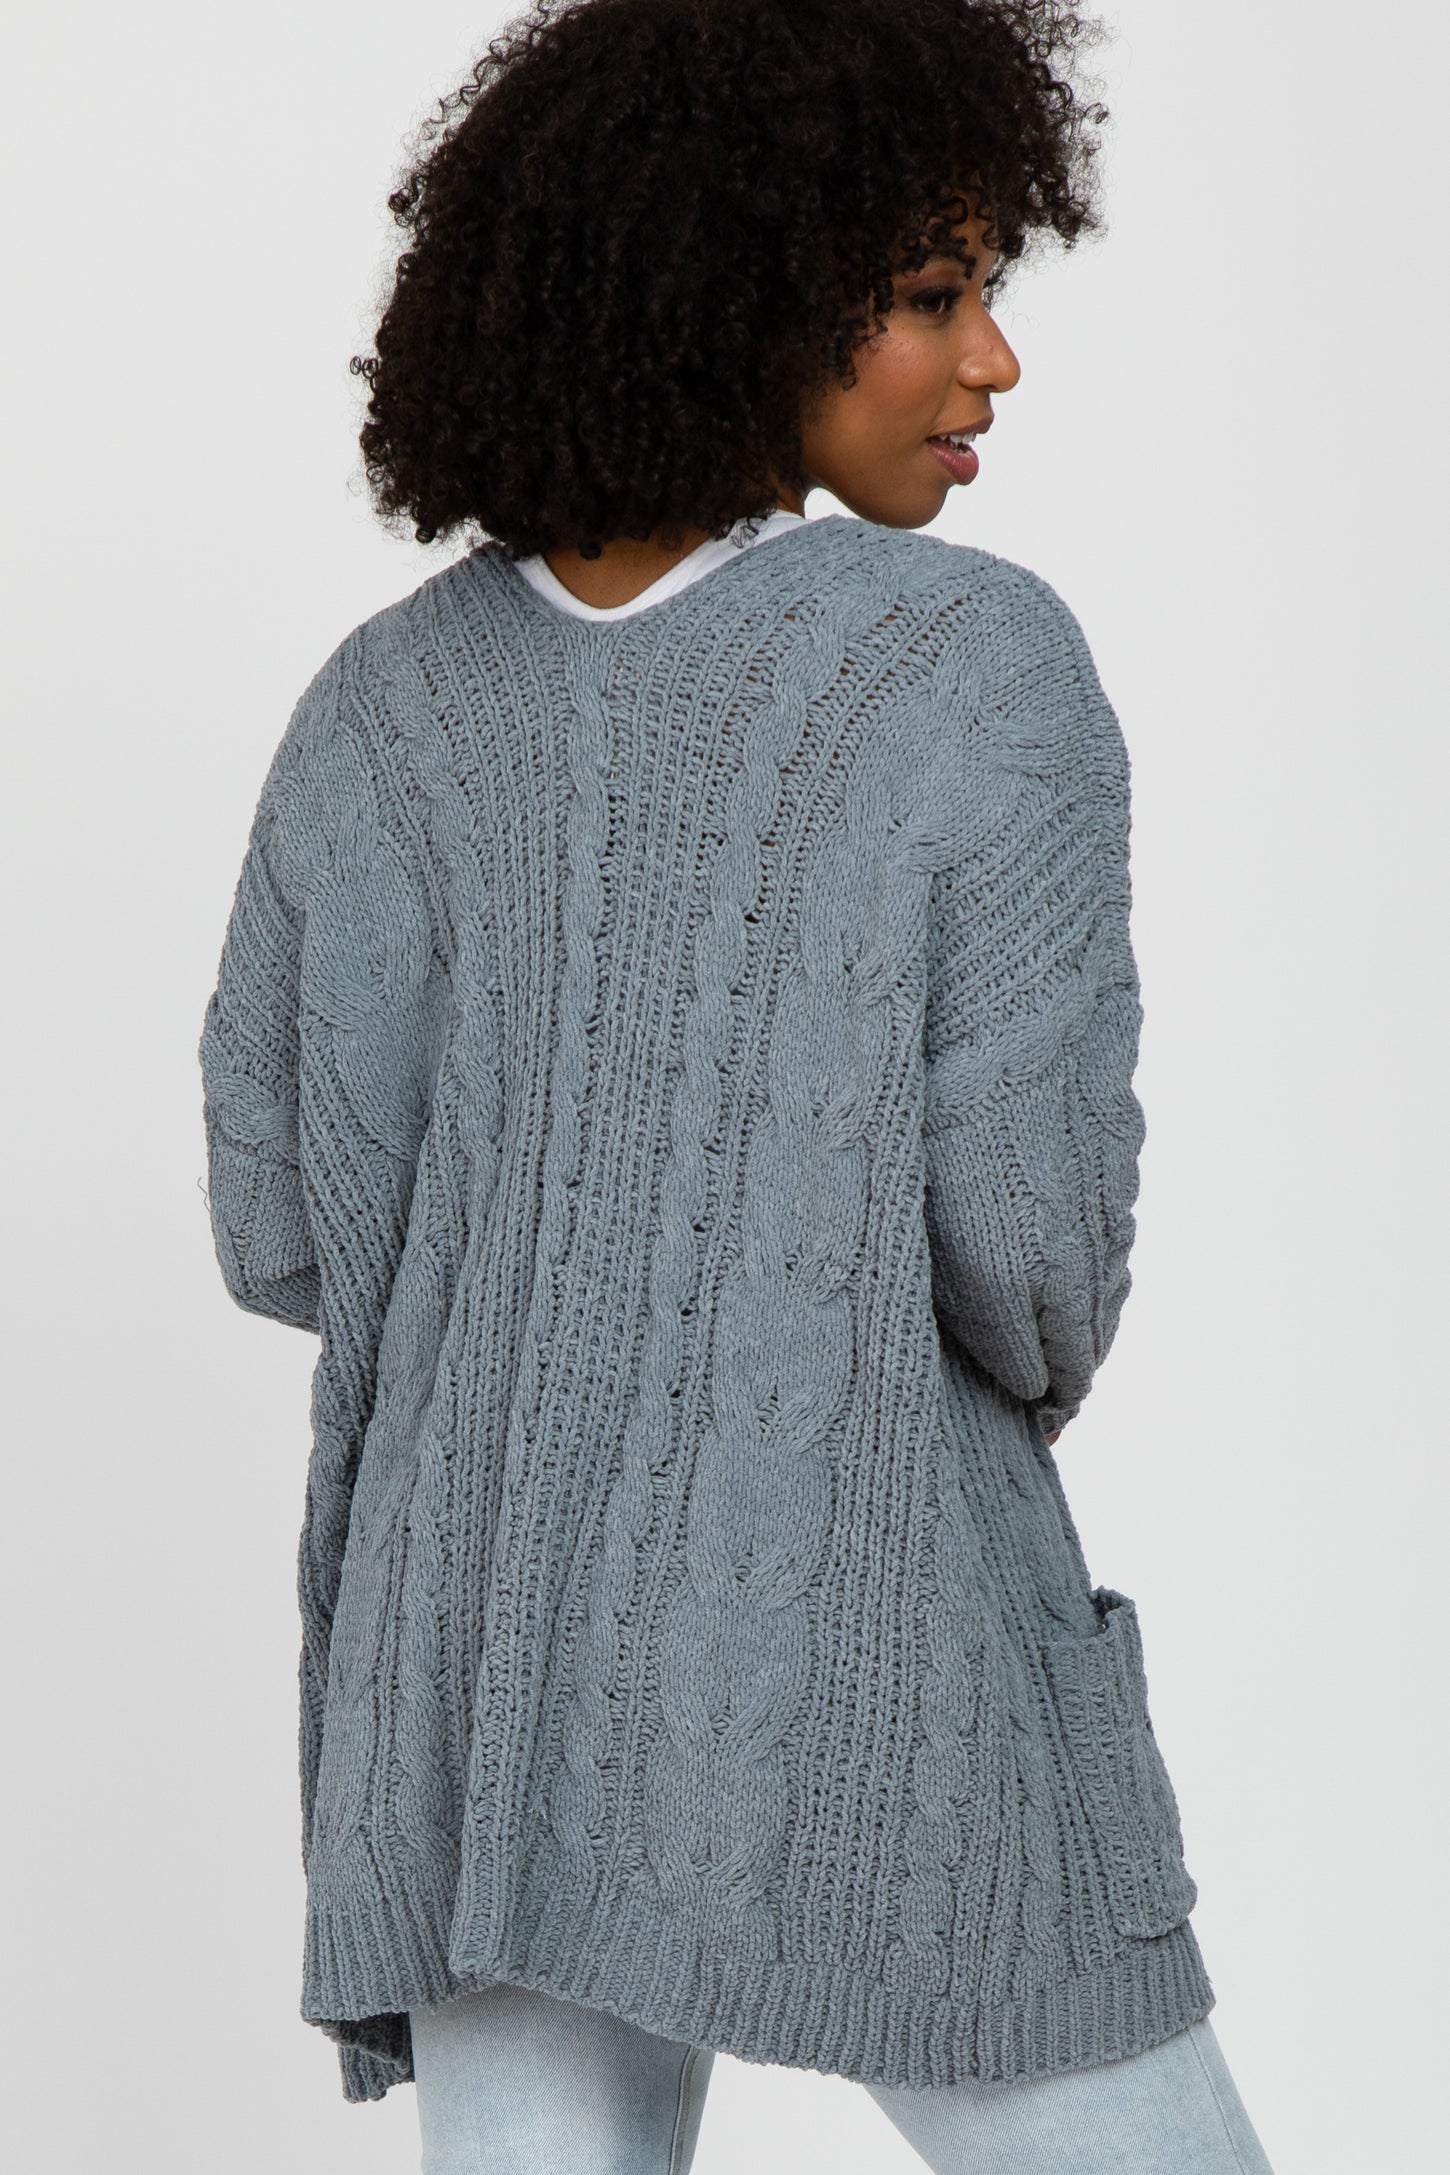 Blue Cable Knit Cardigan